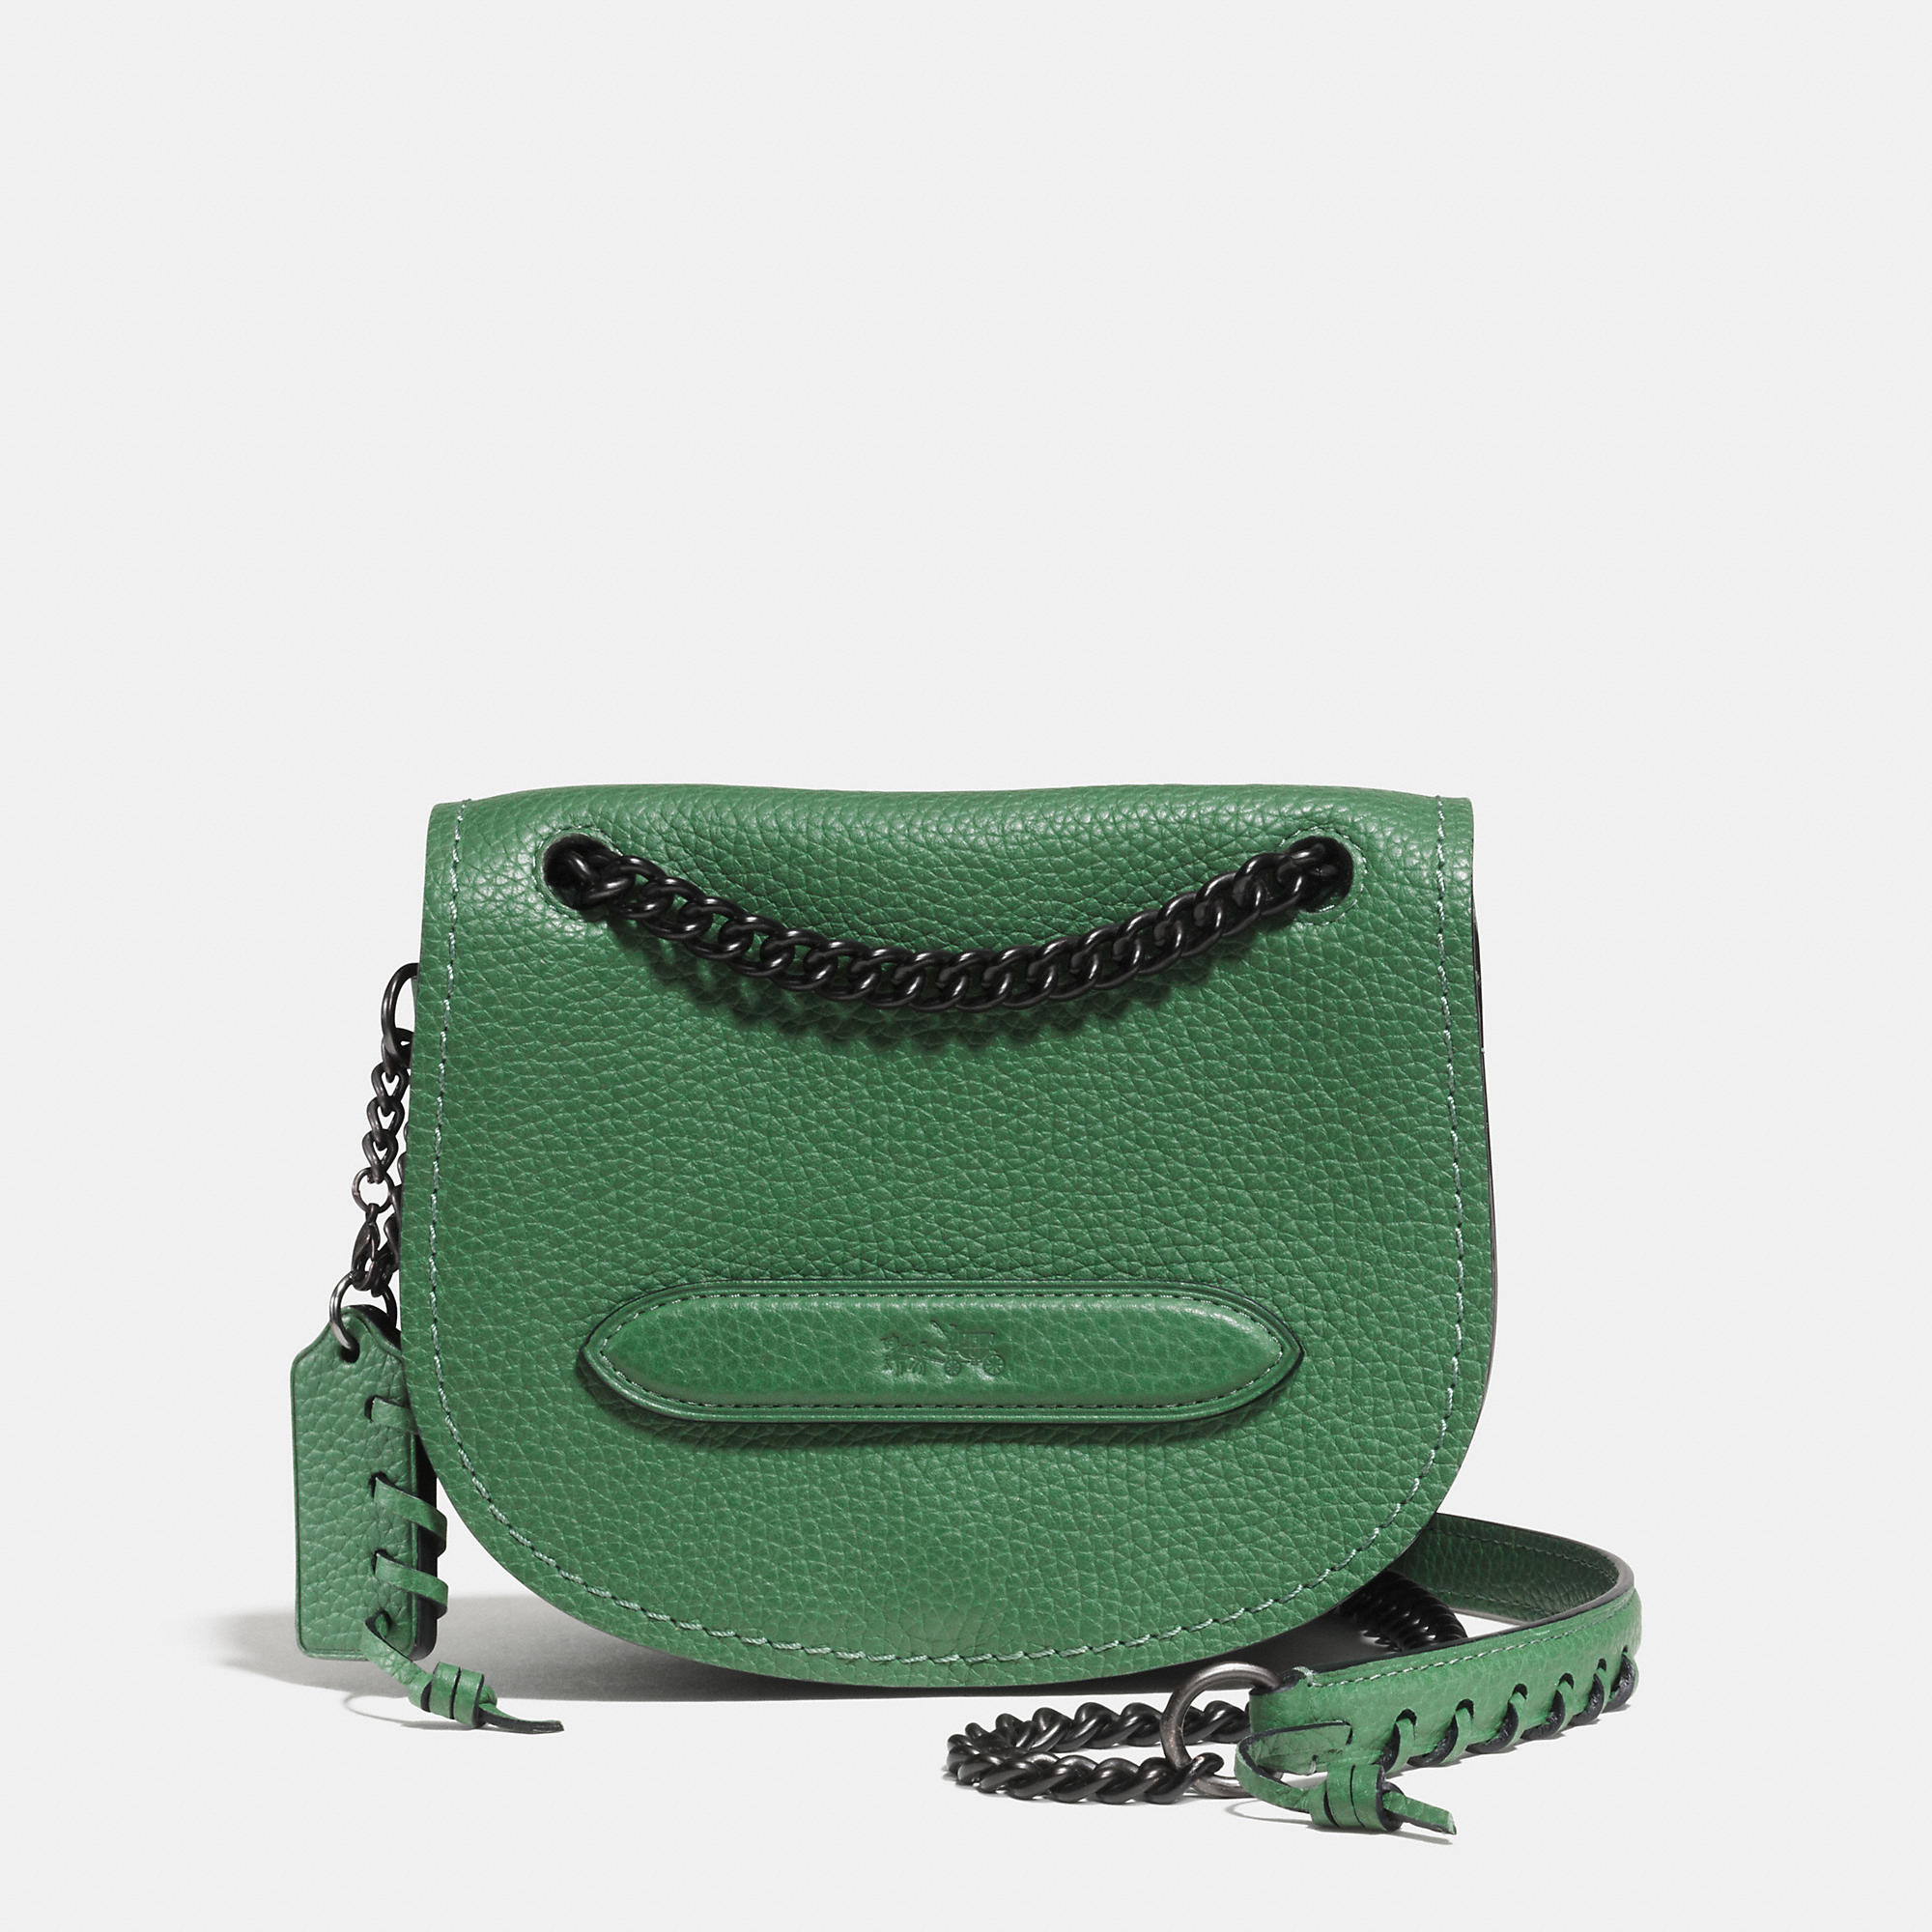 Lyst - Coach Small Shadow Crossbody In Pebble Leather in Green